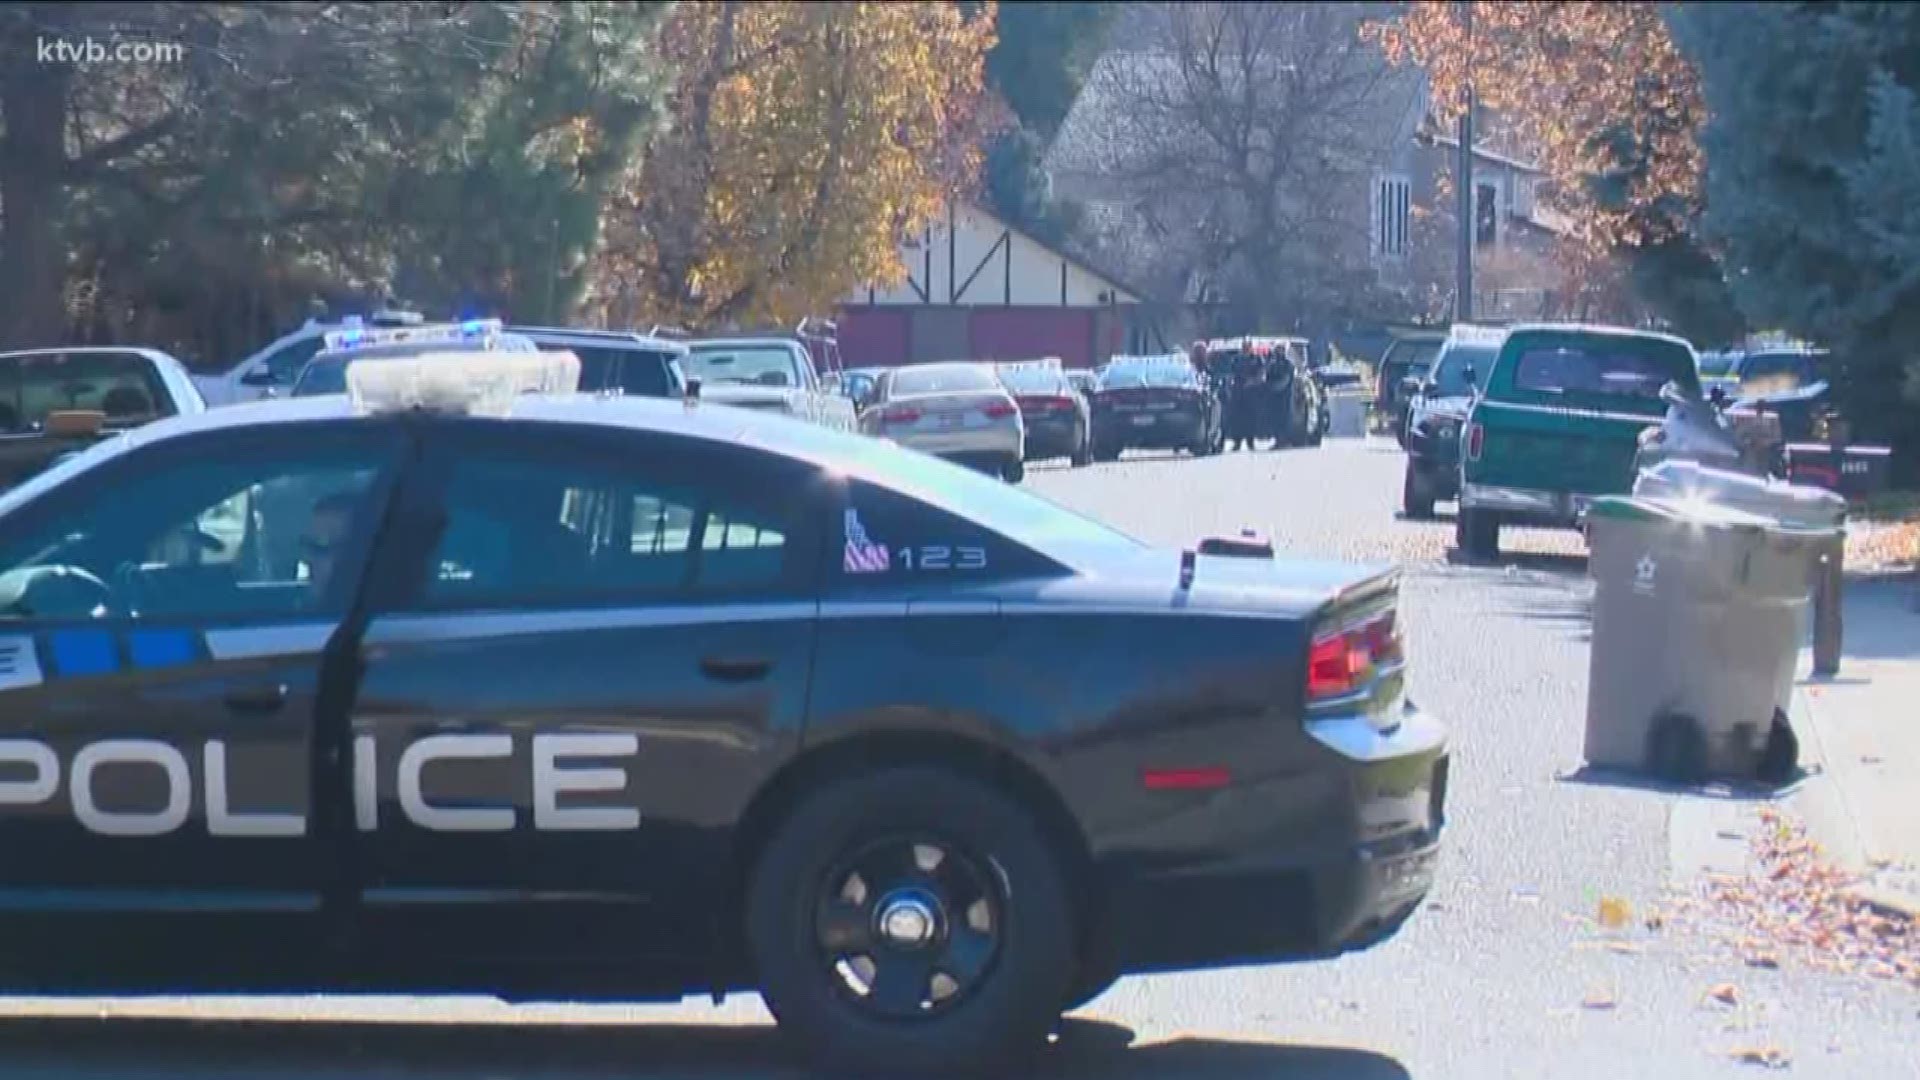 One man was custody and another was sent to the hospital with serious injuries after a Thursday, Nov. 8, stabbing outside a southeast Boise home on Preamble Place.